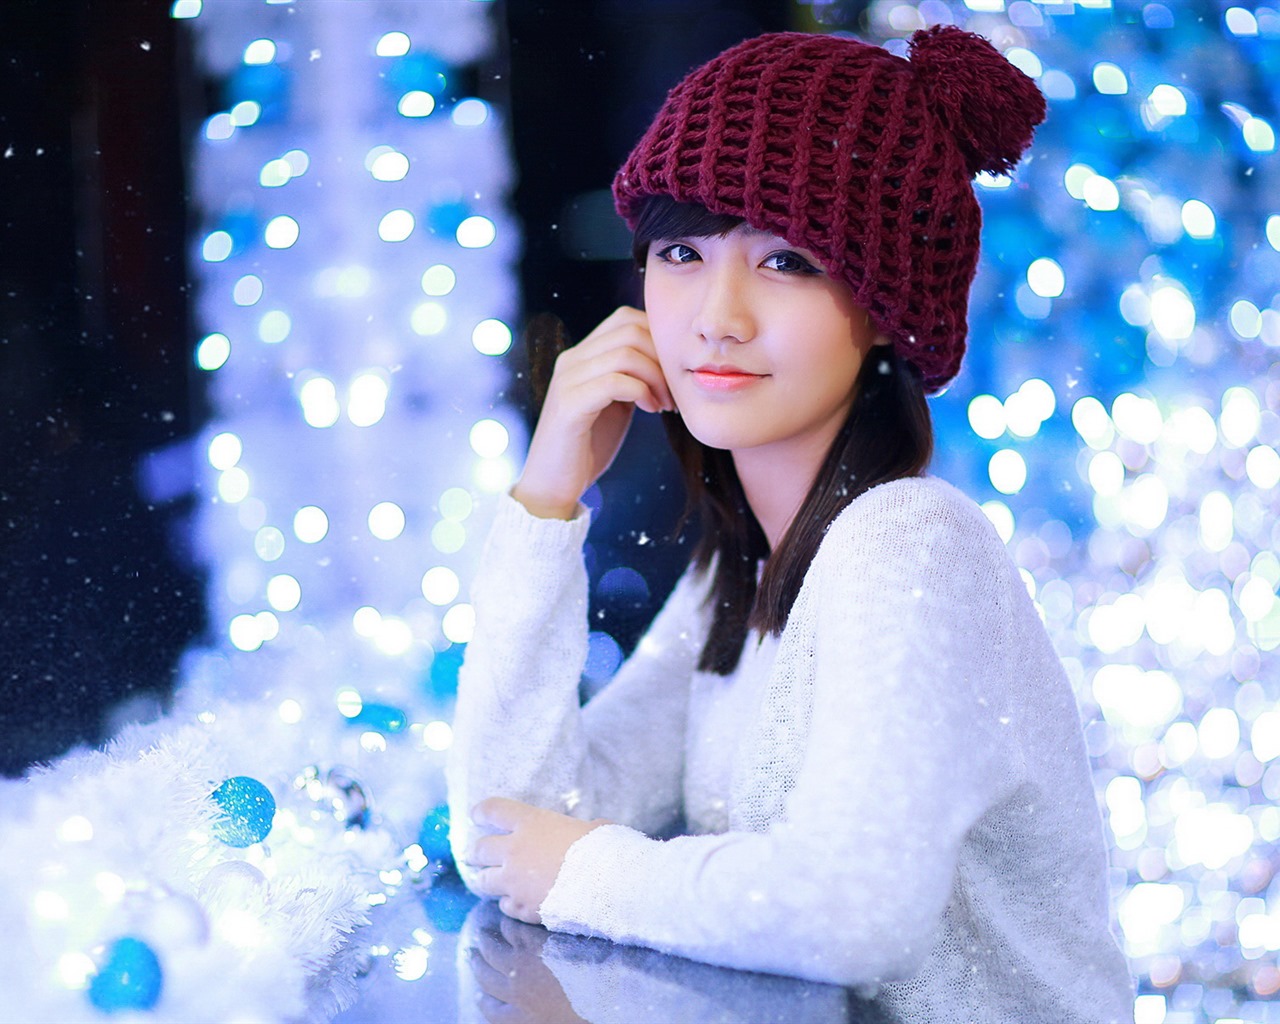 Pure and lovely young Asian girl HD wallpapers collection (4) #36 - 1280x1024